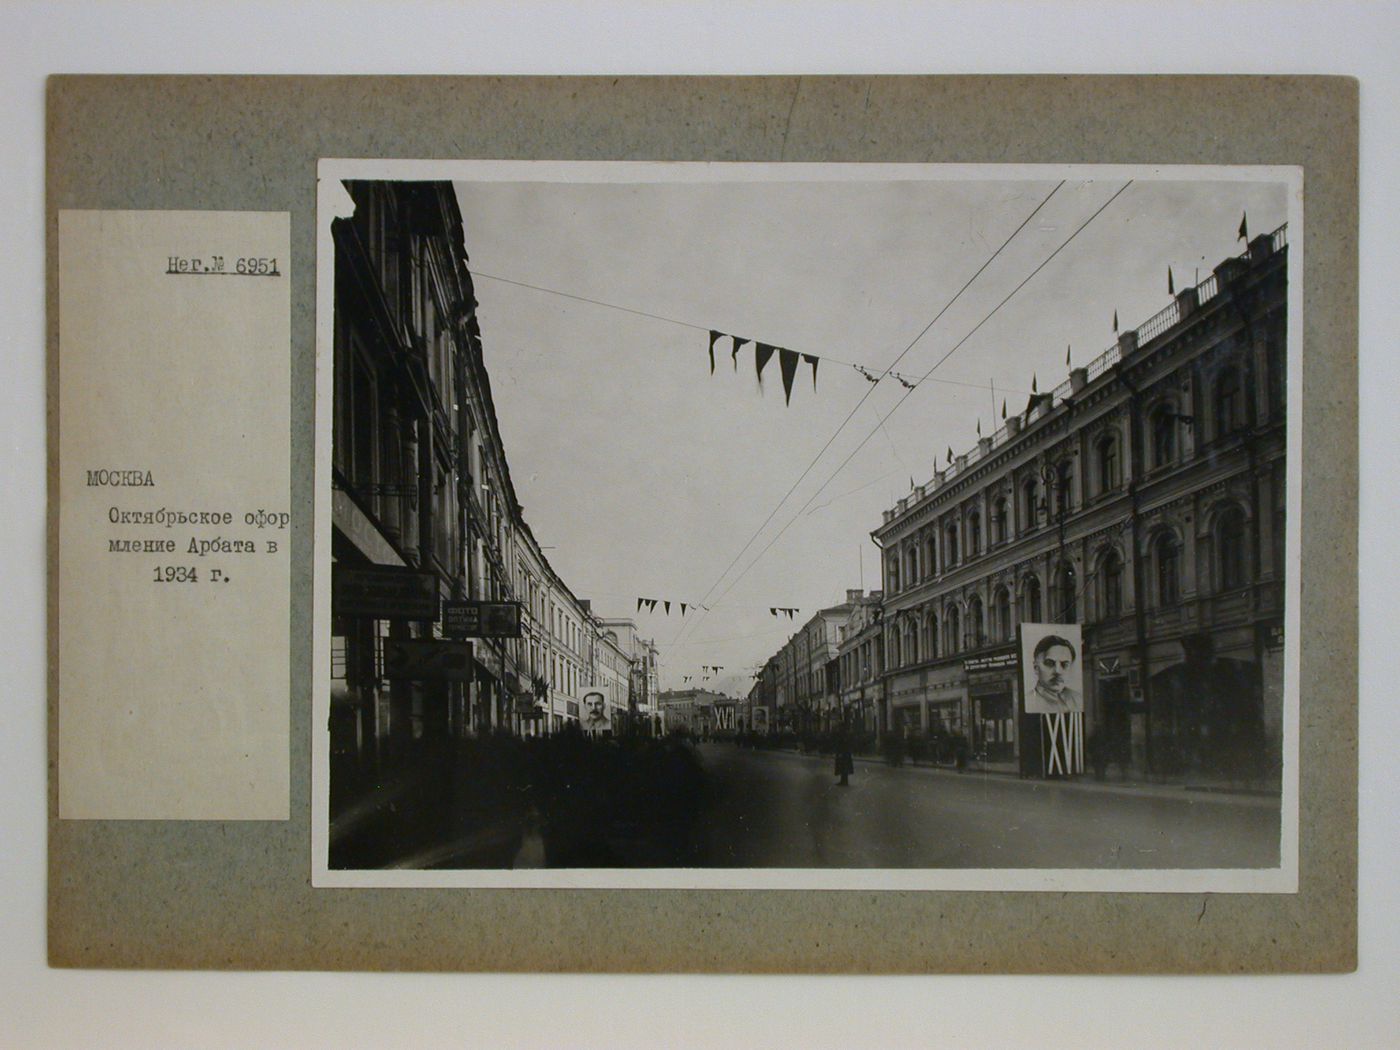 View of Arbat Street showing applied decorations, including portraits of unidentified men, in celebration of the 17th anniversary of the Bolshevik Revolution, Moscow, Soviet Union (now in Russia)